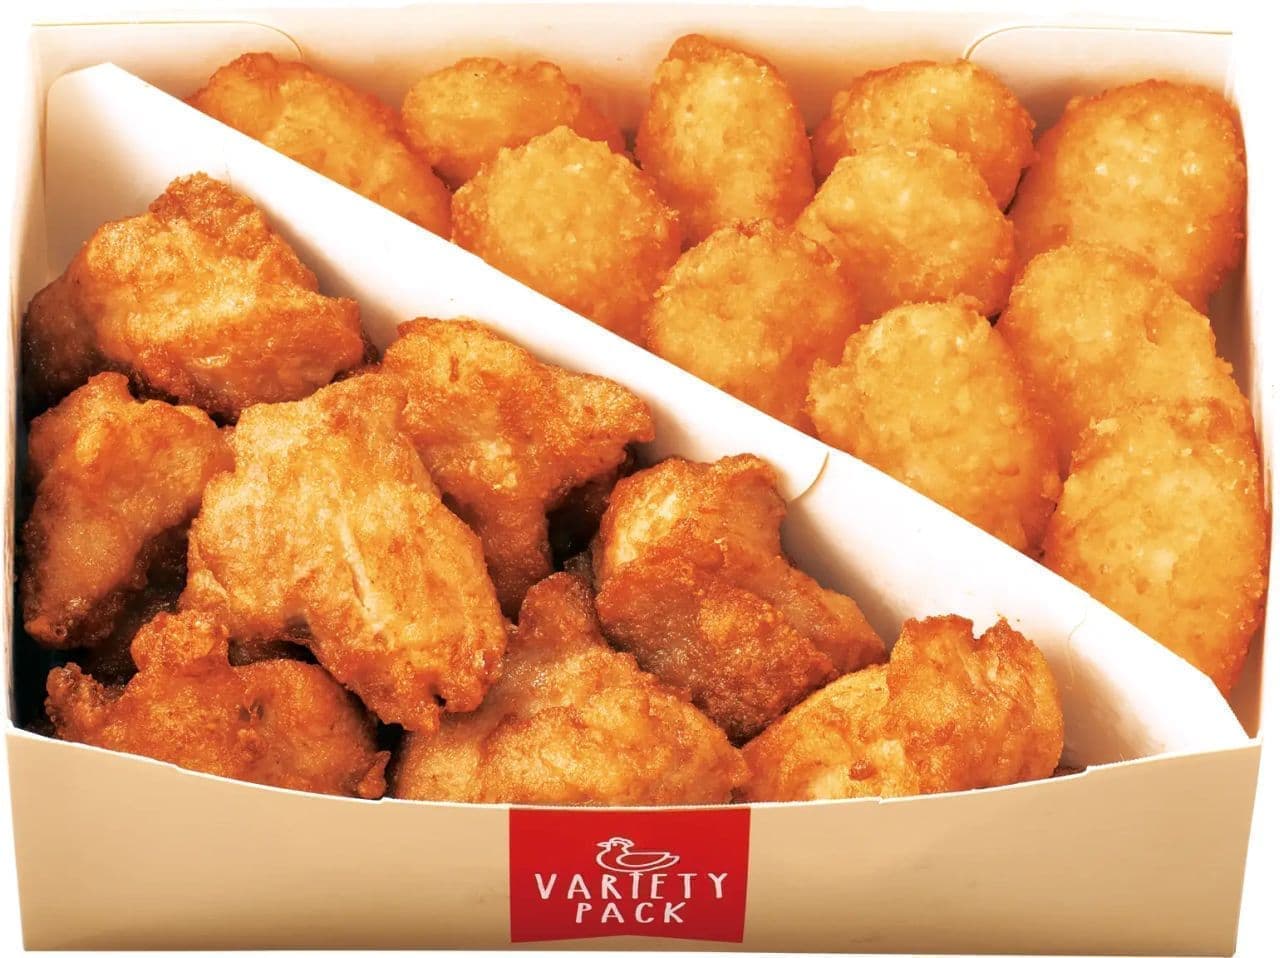 Hotto Motto "Chicken Variety Pack (Double)